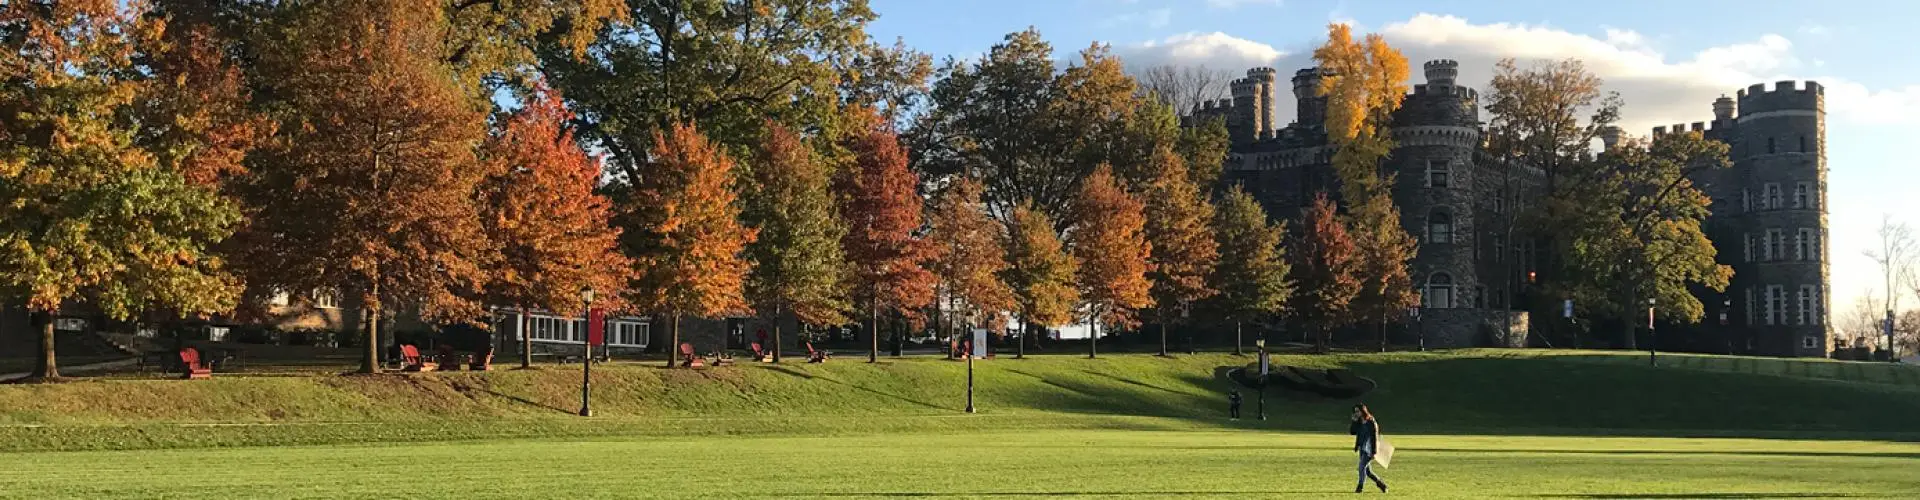 A panorama of campus during the autumn season